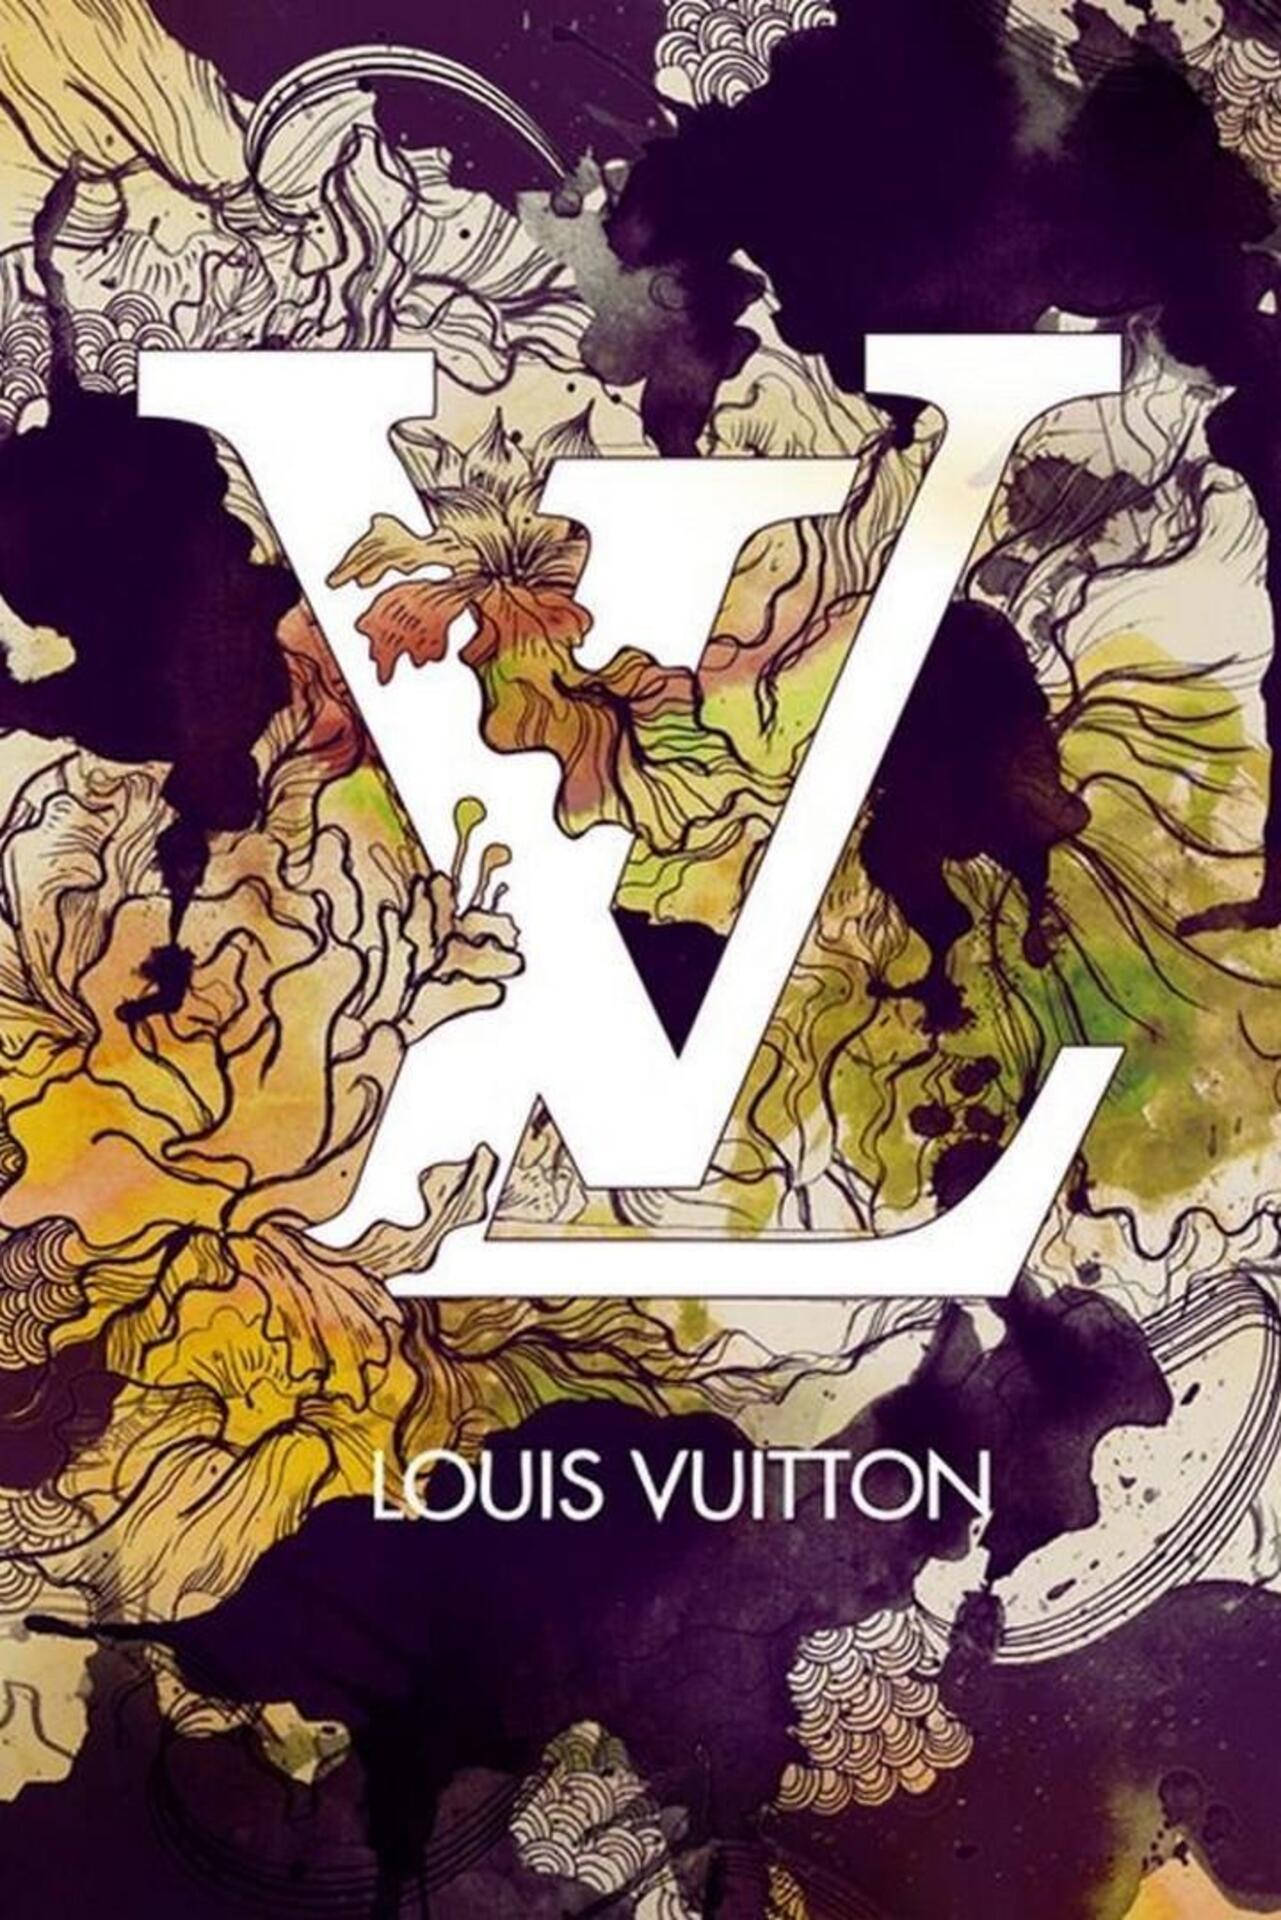 'be The Flower Of The Crowd With The Latest Lv Fashion!'